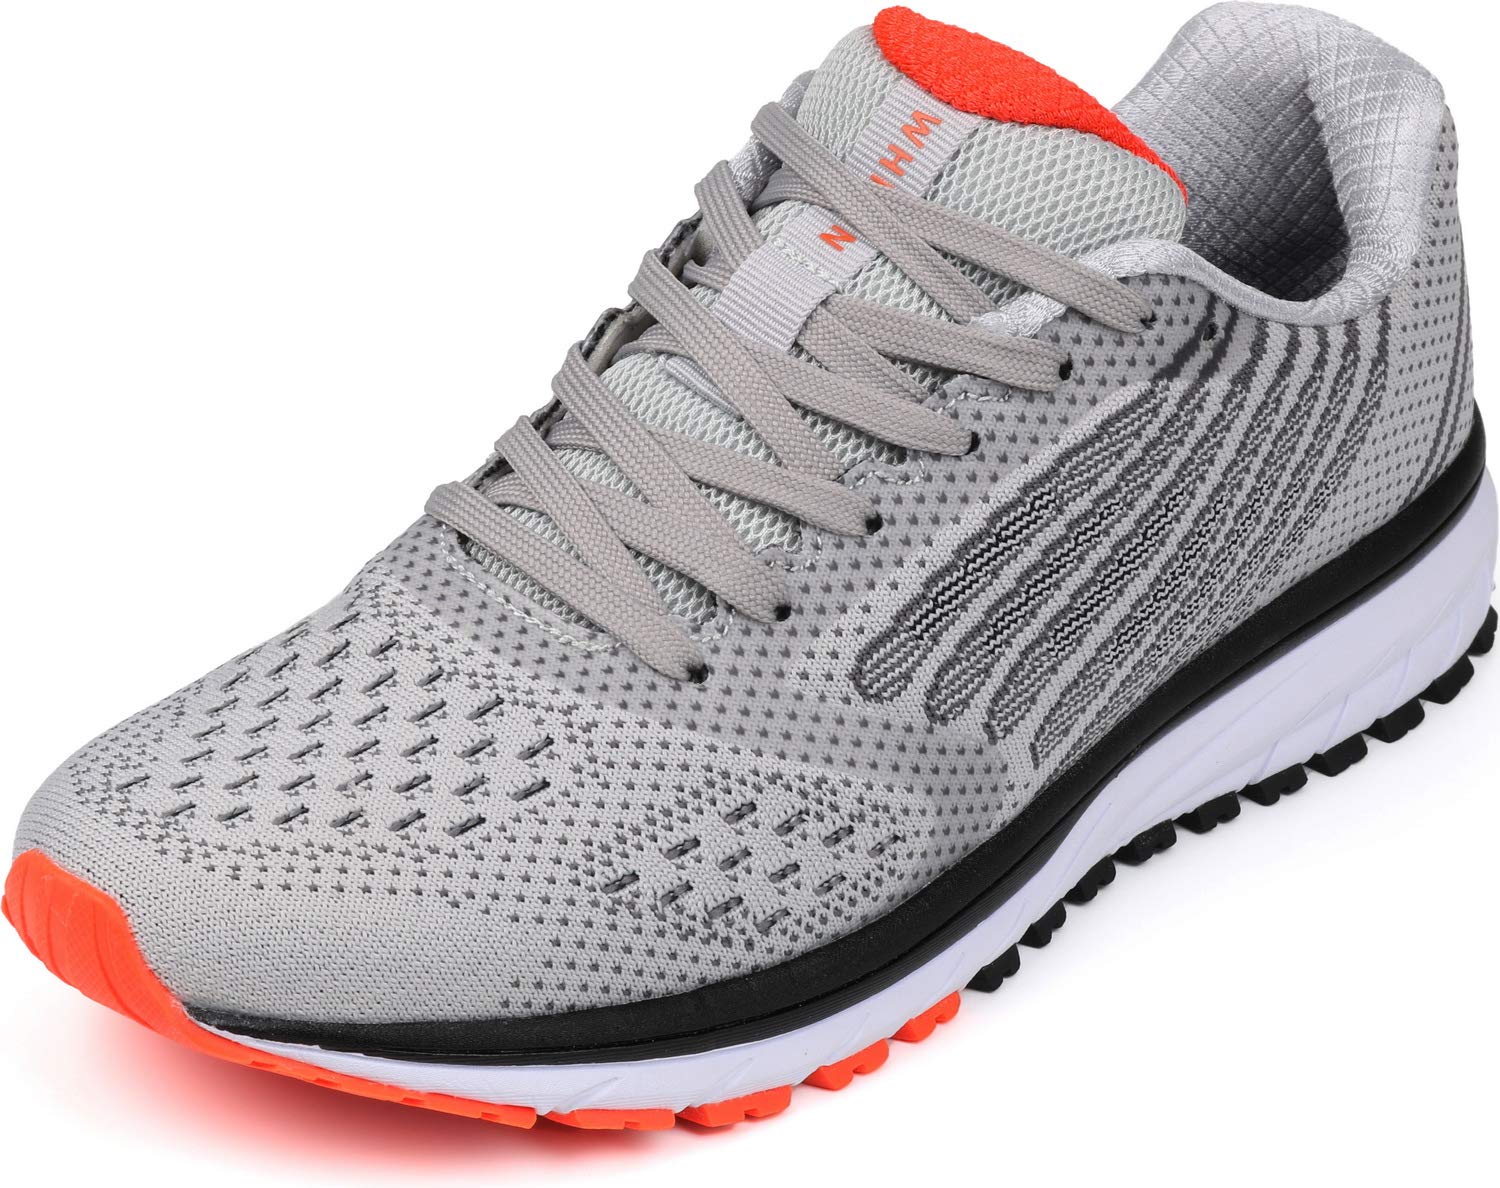 Buy WHITIN Running Shoes Men Women Trainers Sports Shoes Available in 9 ...